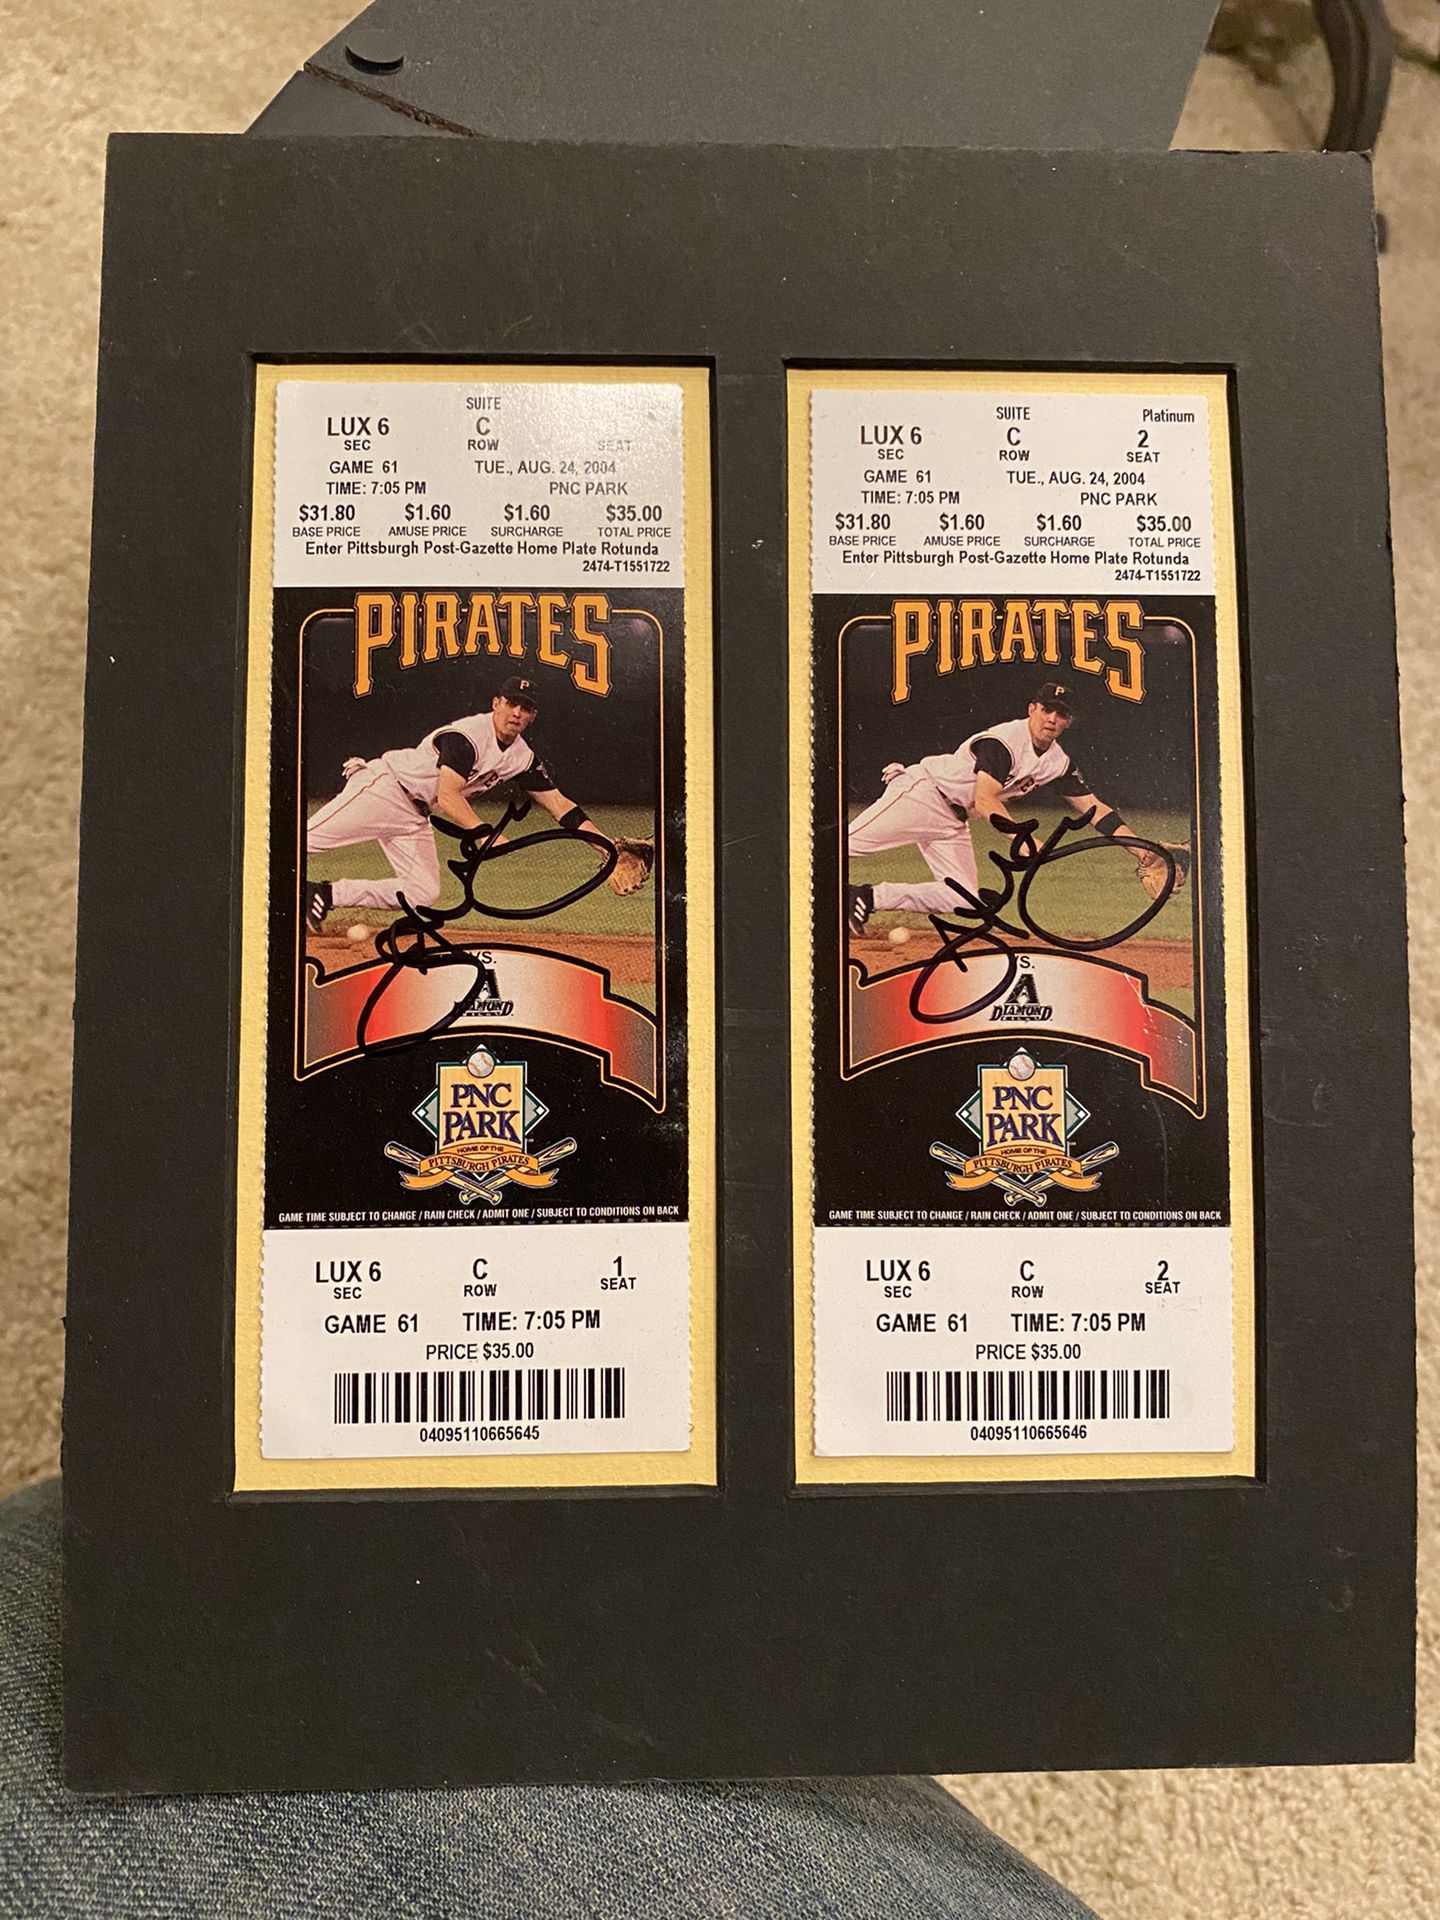 Autographed Jack Wilson 2004 Pirates tickets